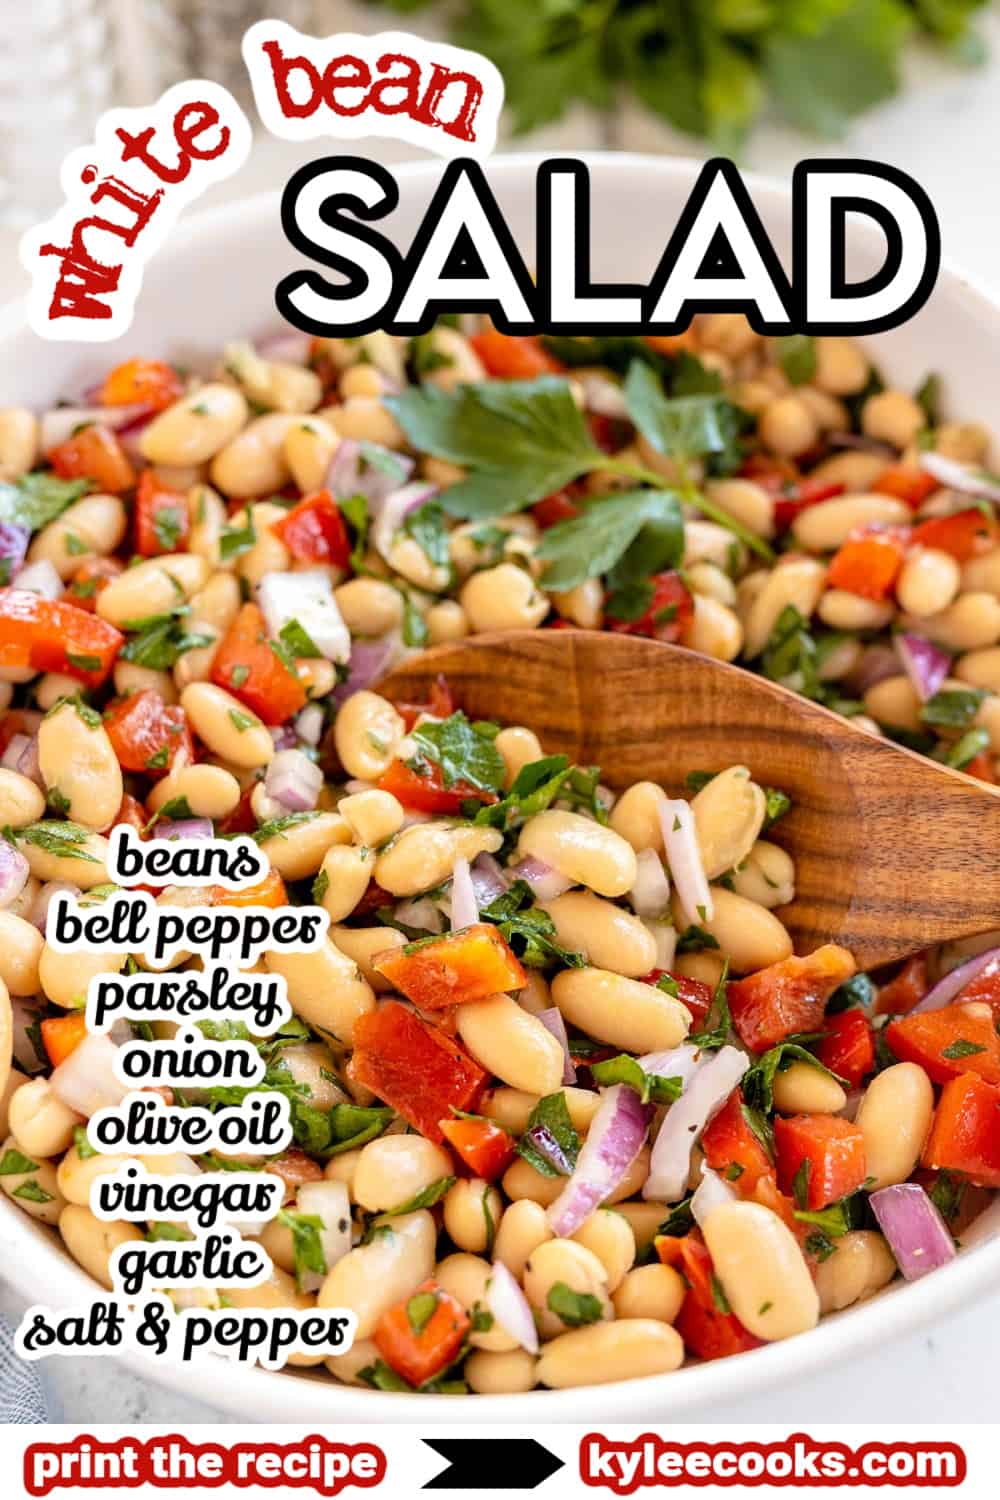 white bean salad in a bowl with ingredients listed in text overlay.